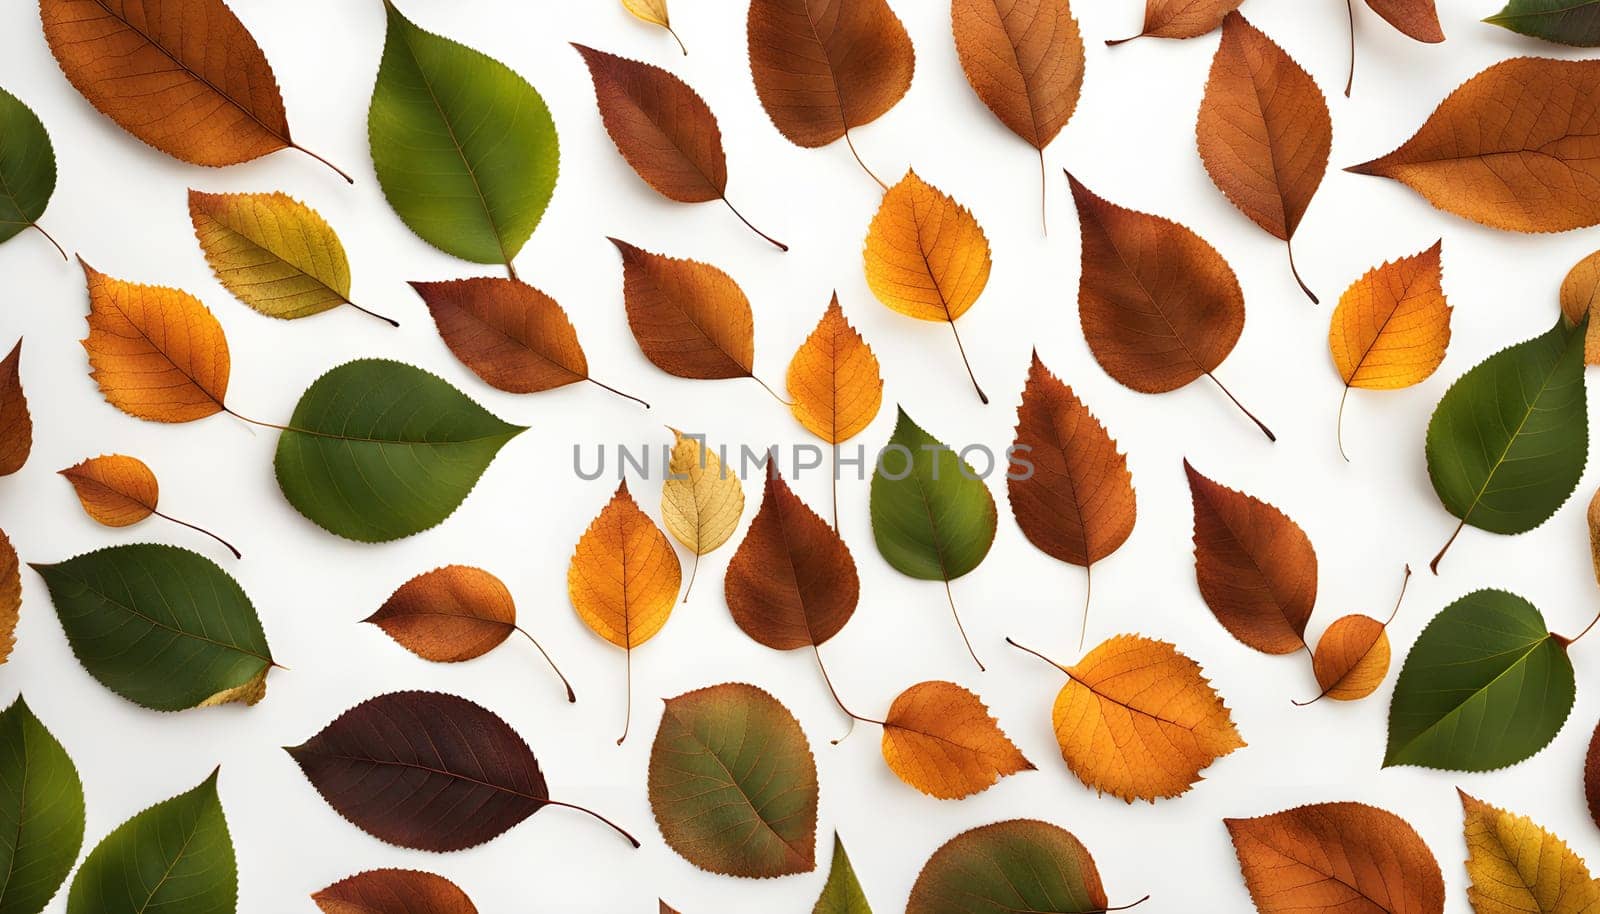 pattern of leaves lying on the ground, high close-up of leaves scattered on a white background by rostik924